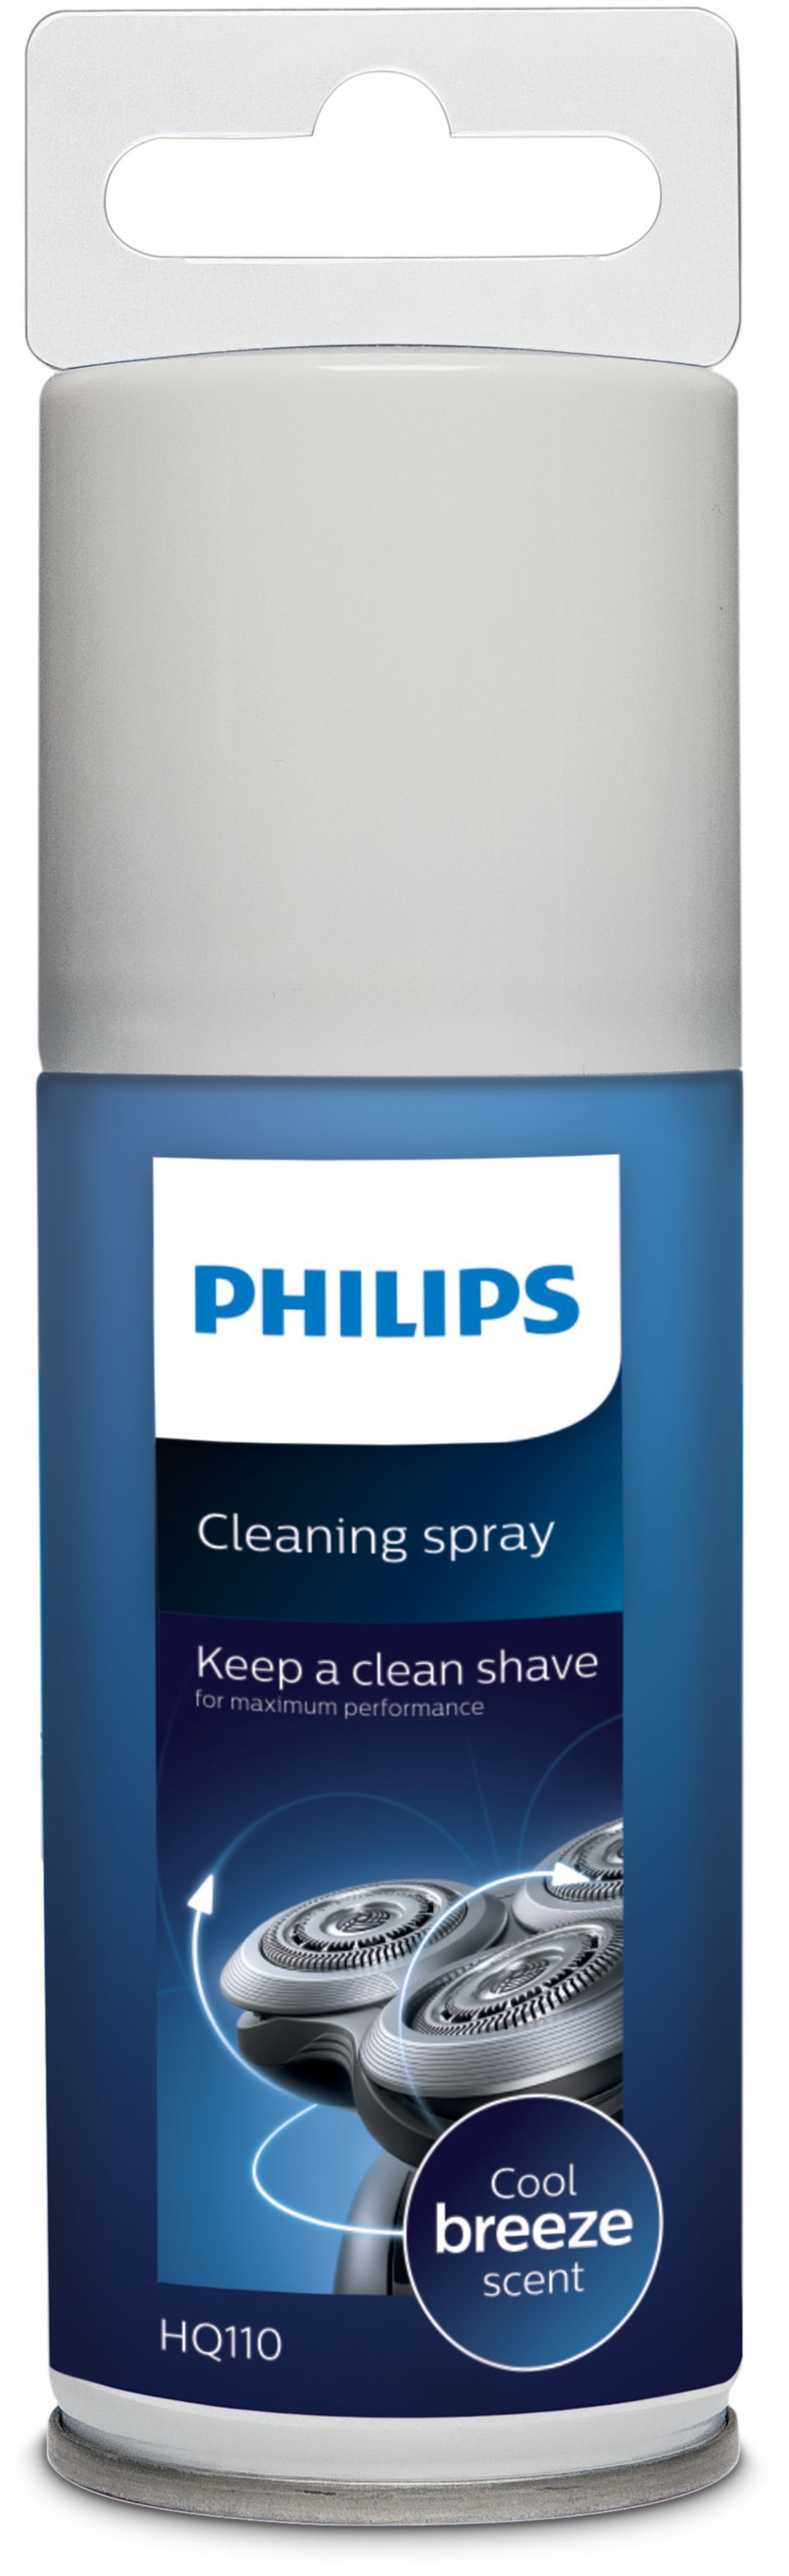 Shaving heads cleaning spray HQ110/02